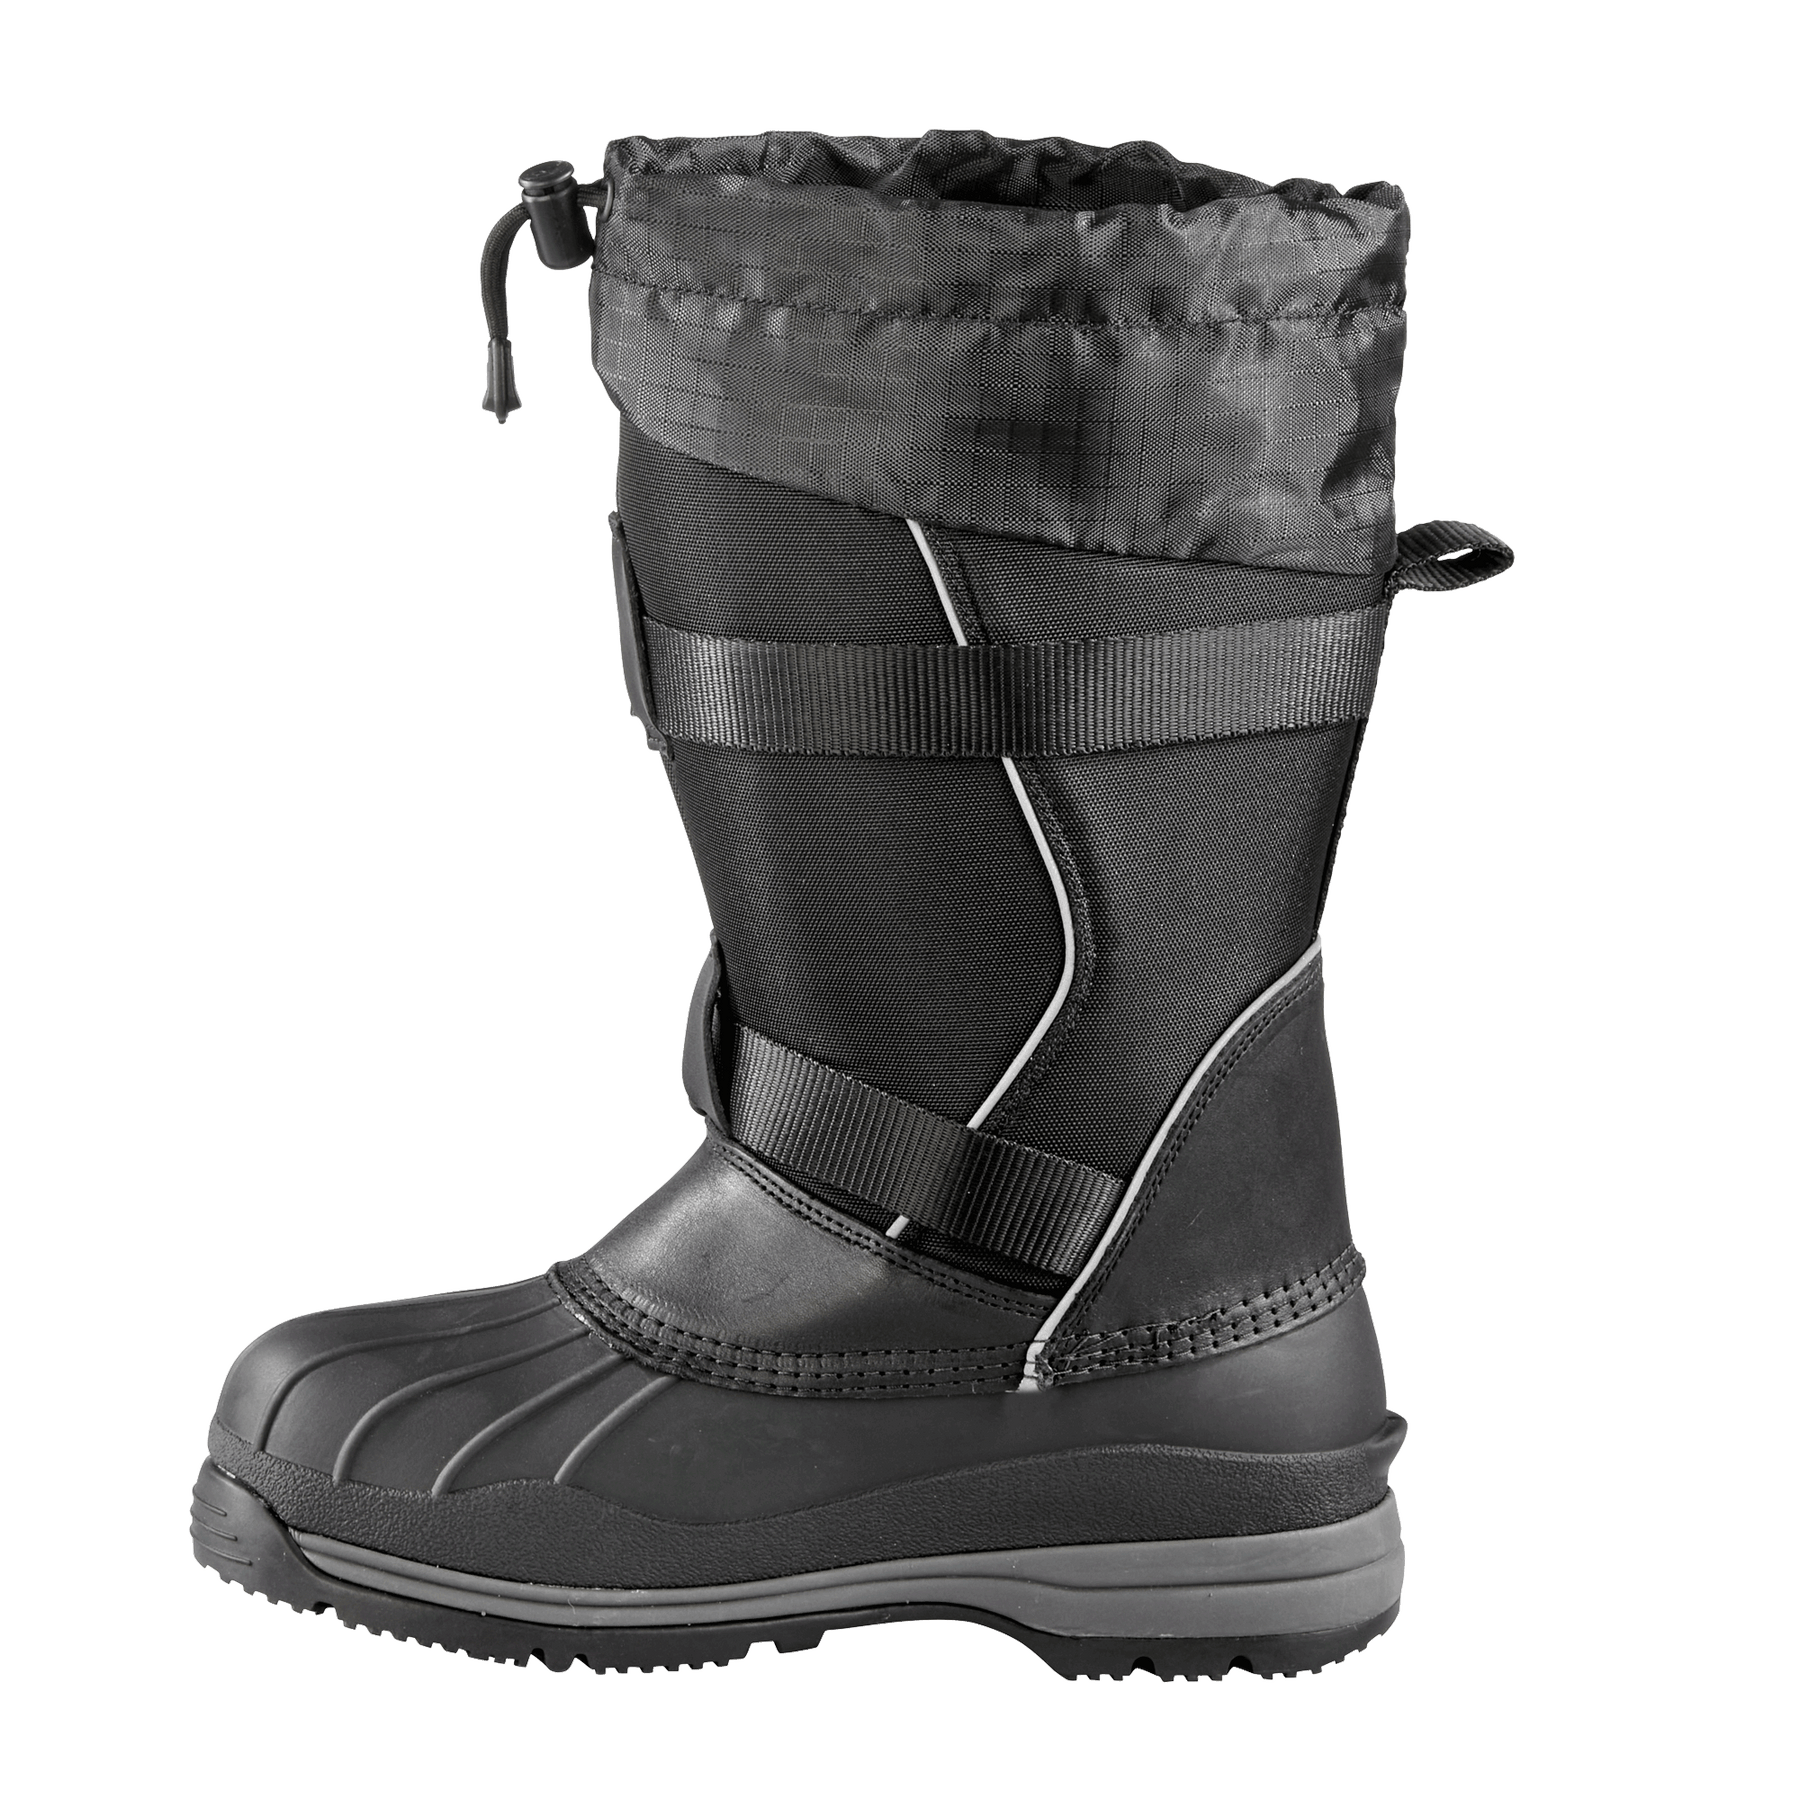 IMPACT | Women's Boot – Baffin - Born in the North '79